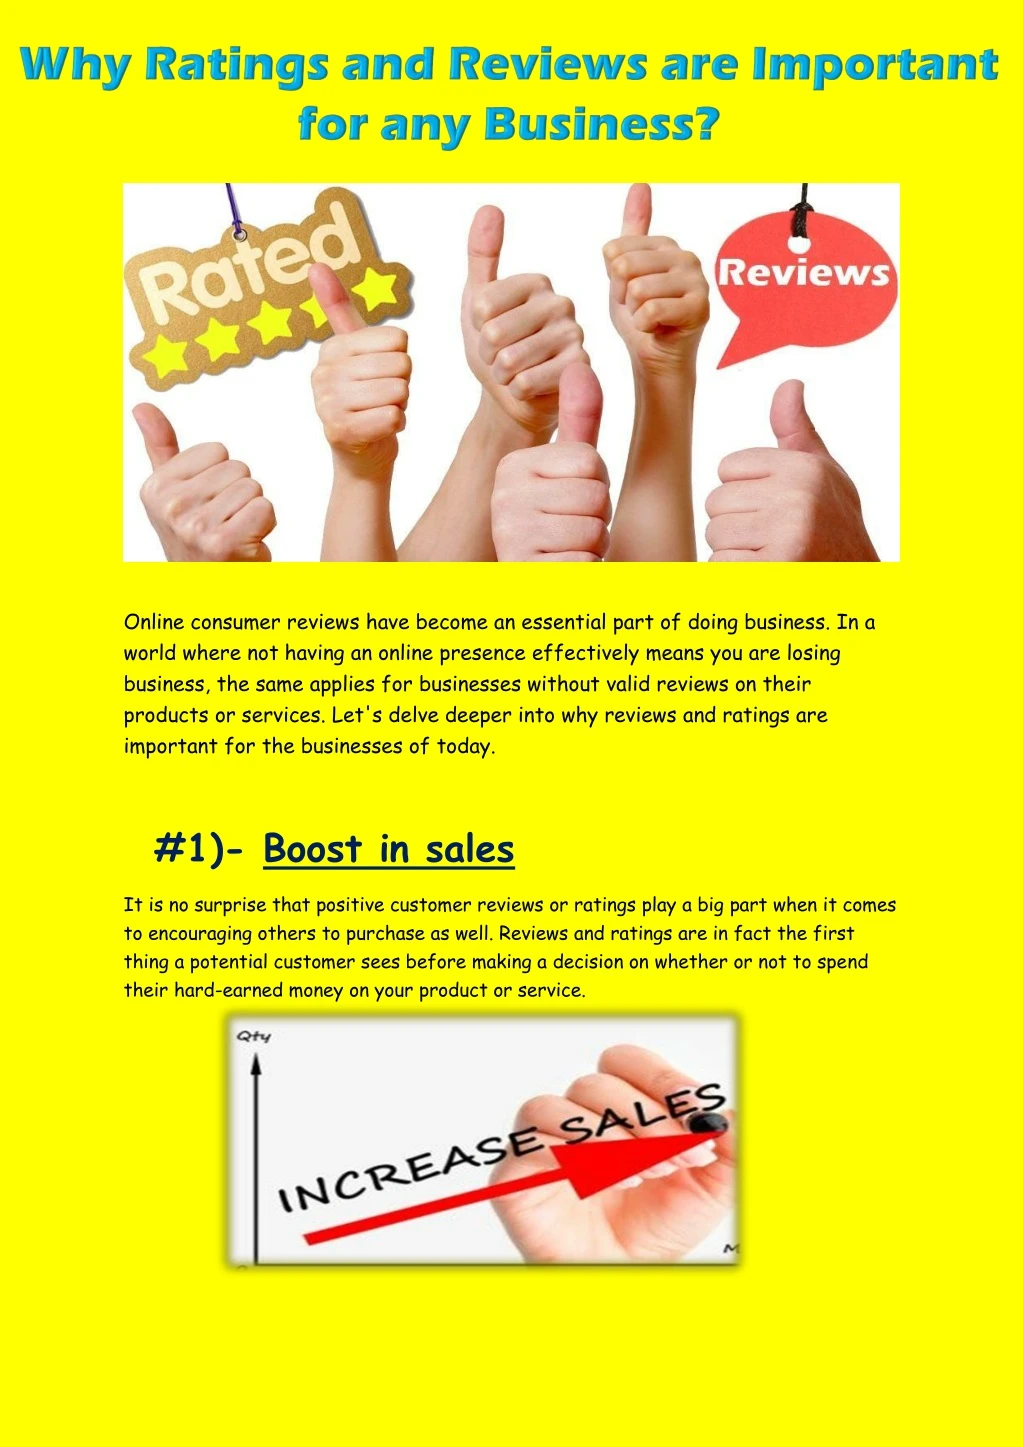 online consumer reviews have become an essential